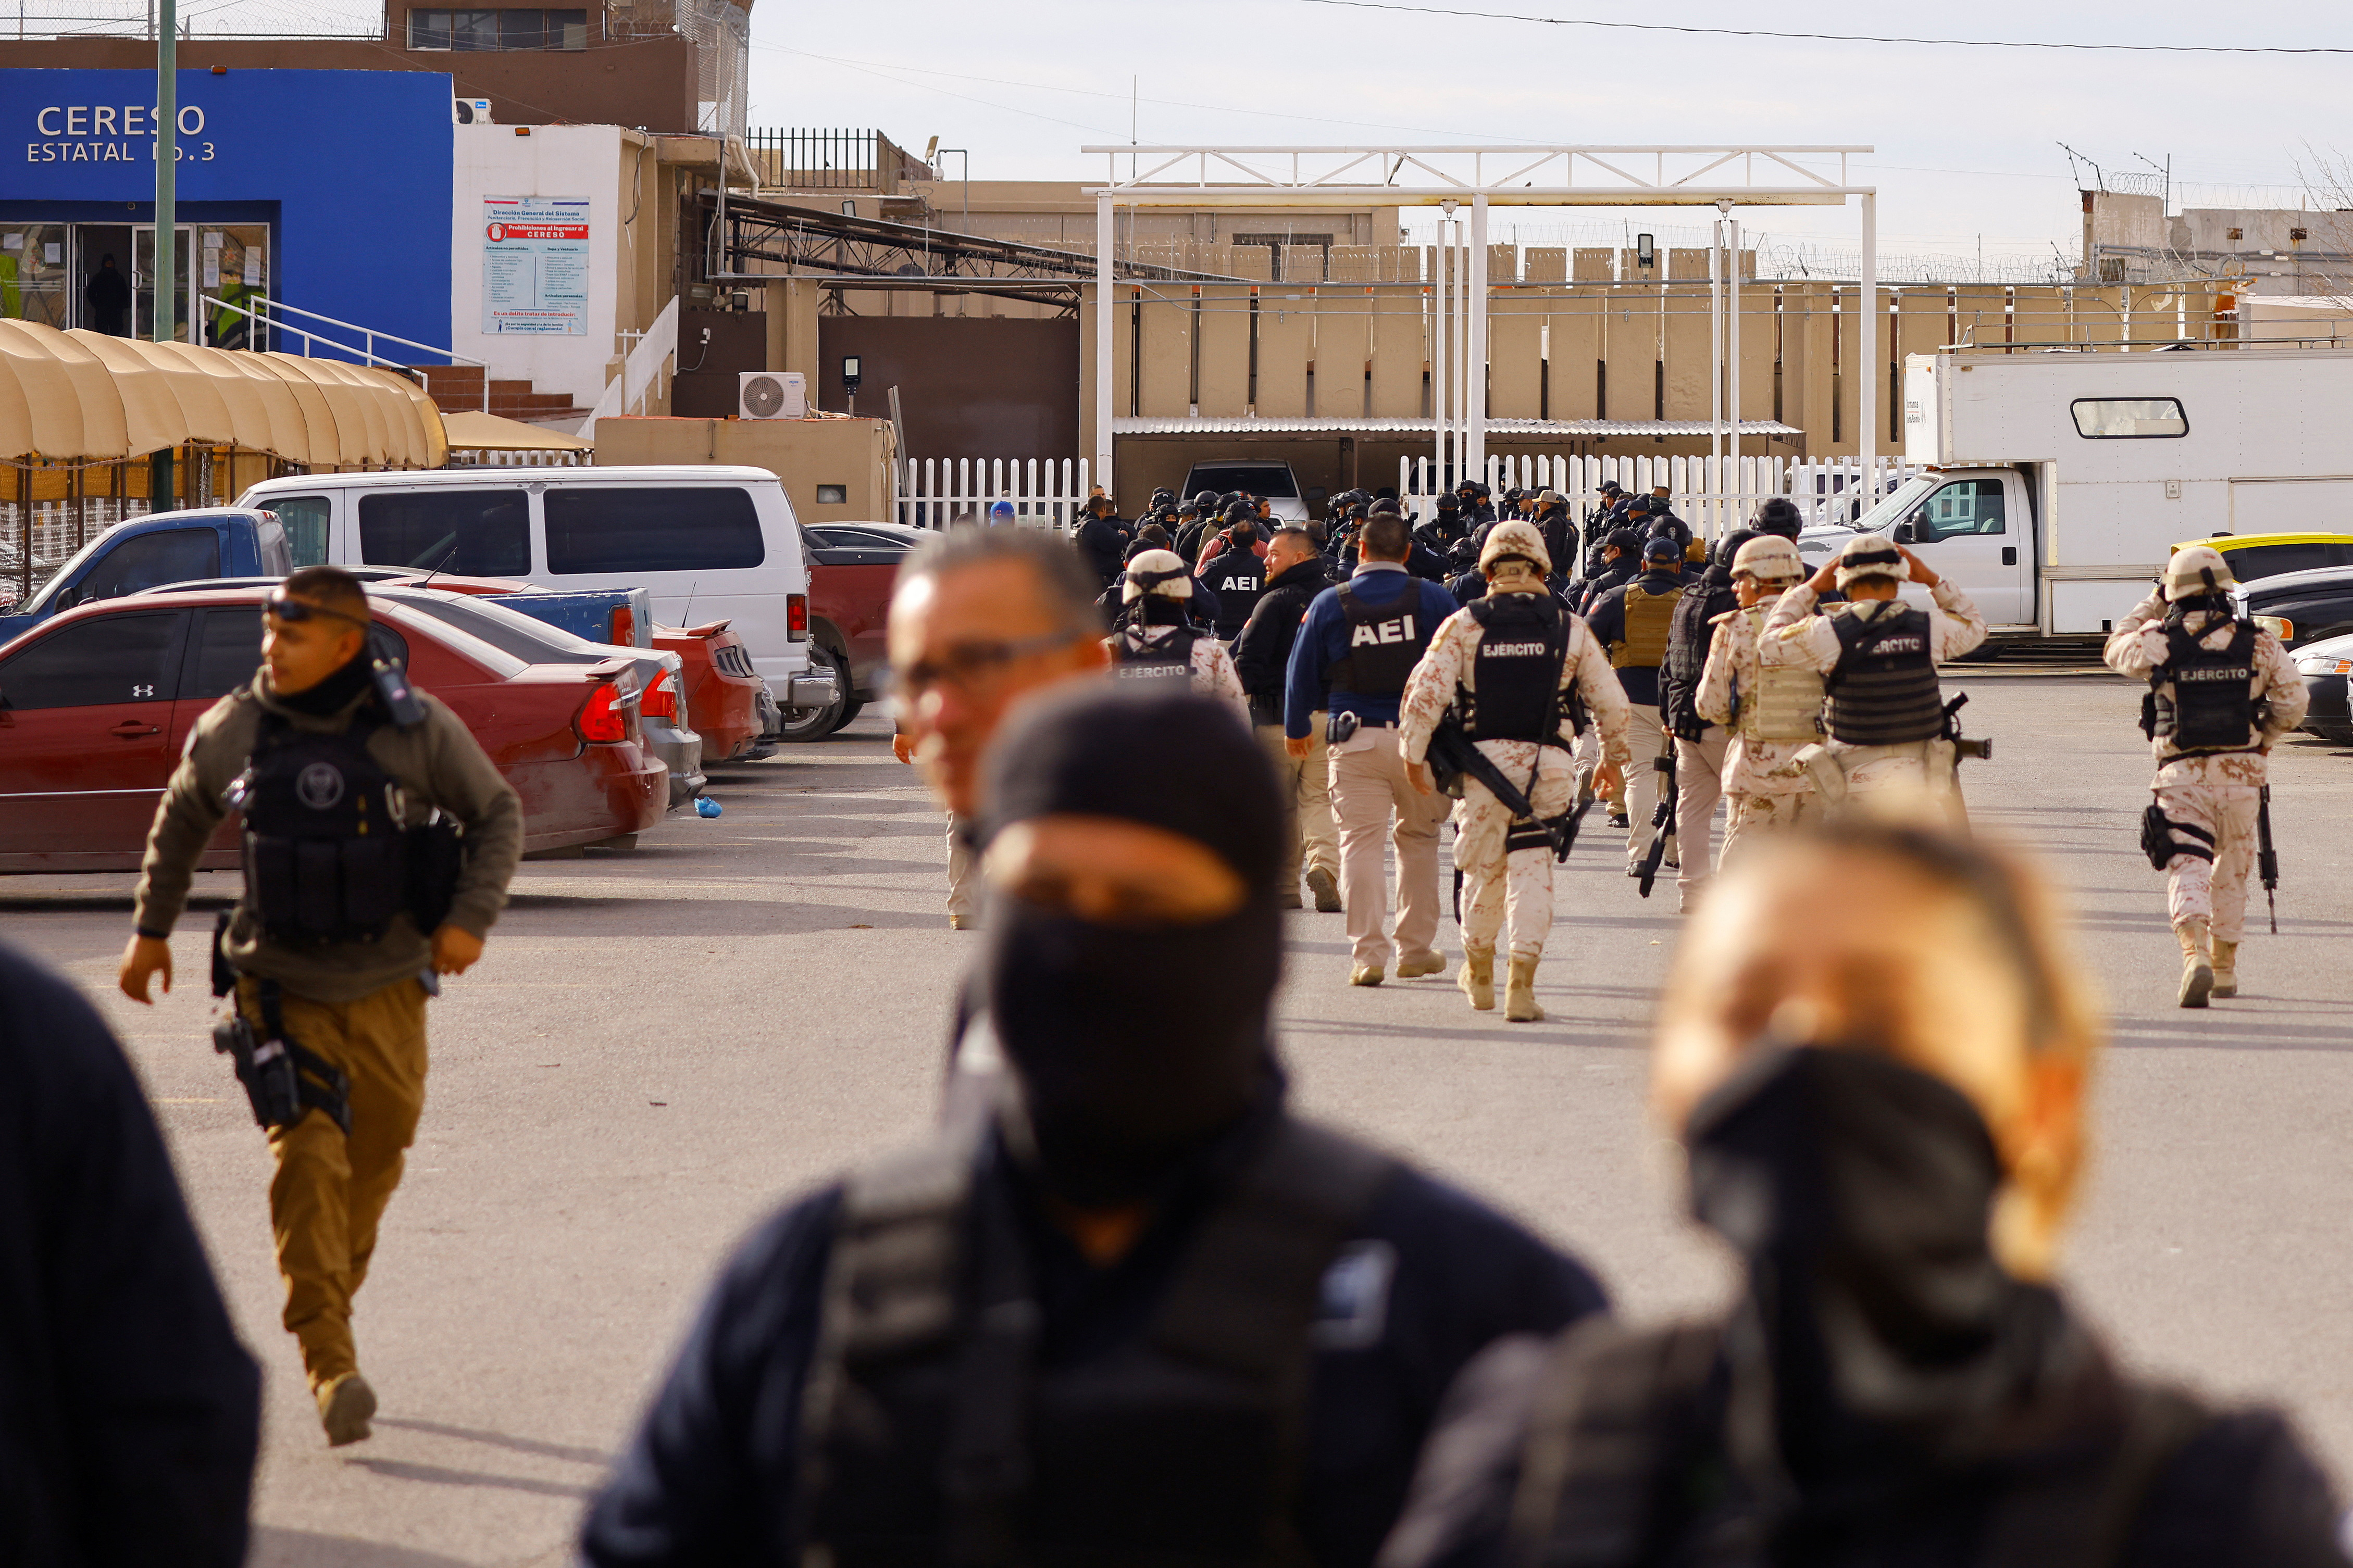 Security forces arrive at Cereso number 3 state prison after unknown assailants entered the prison and freed several inmates, resulting in injuries and deaths, in Ciudad Juarez